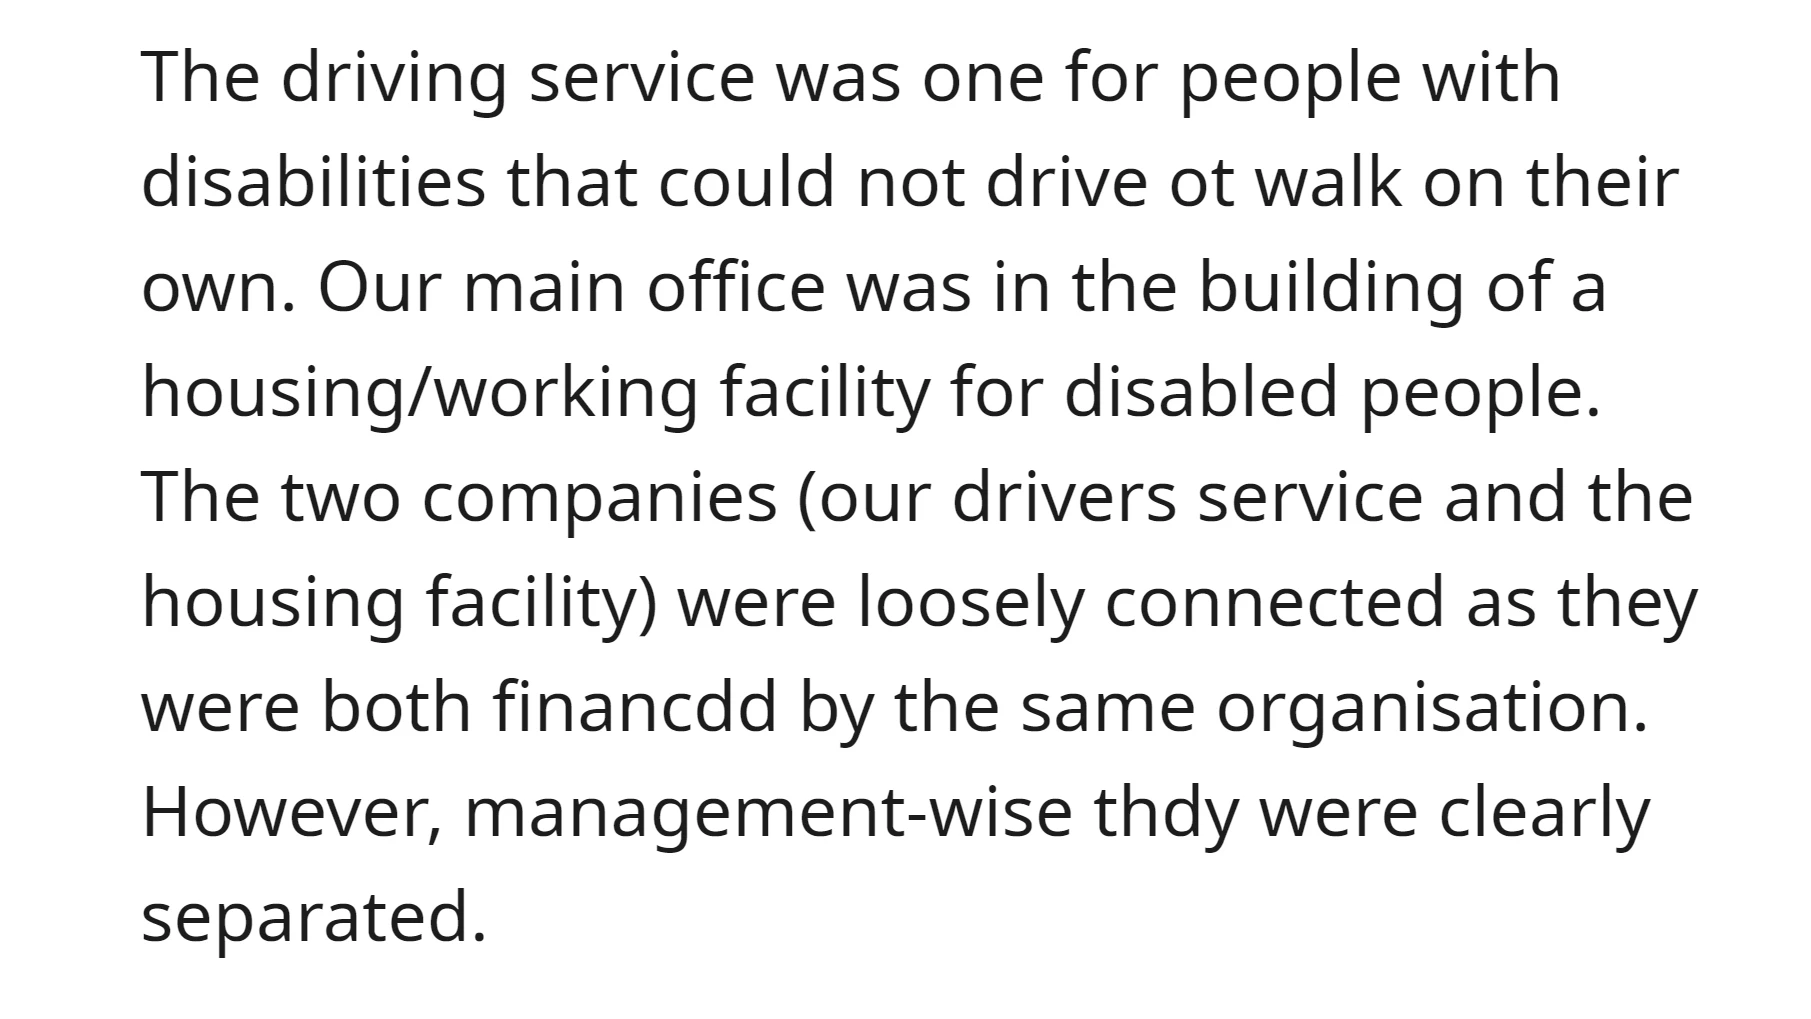 OP worked for a driving service catering to people with disabilities